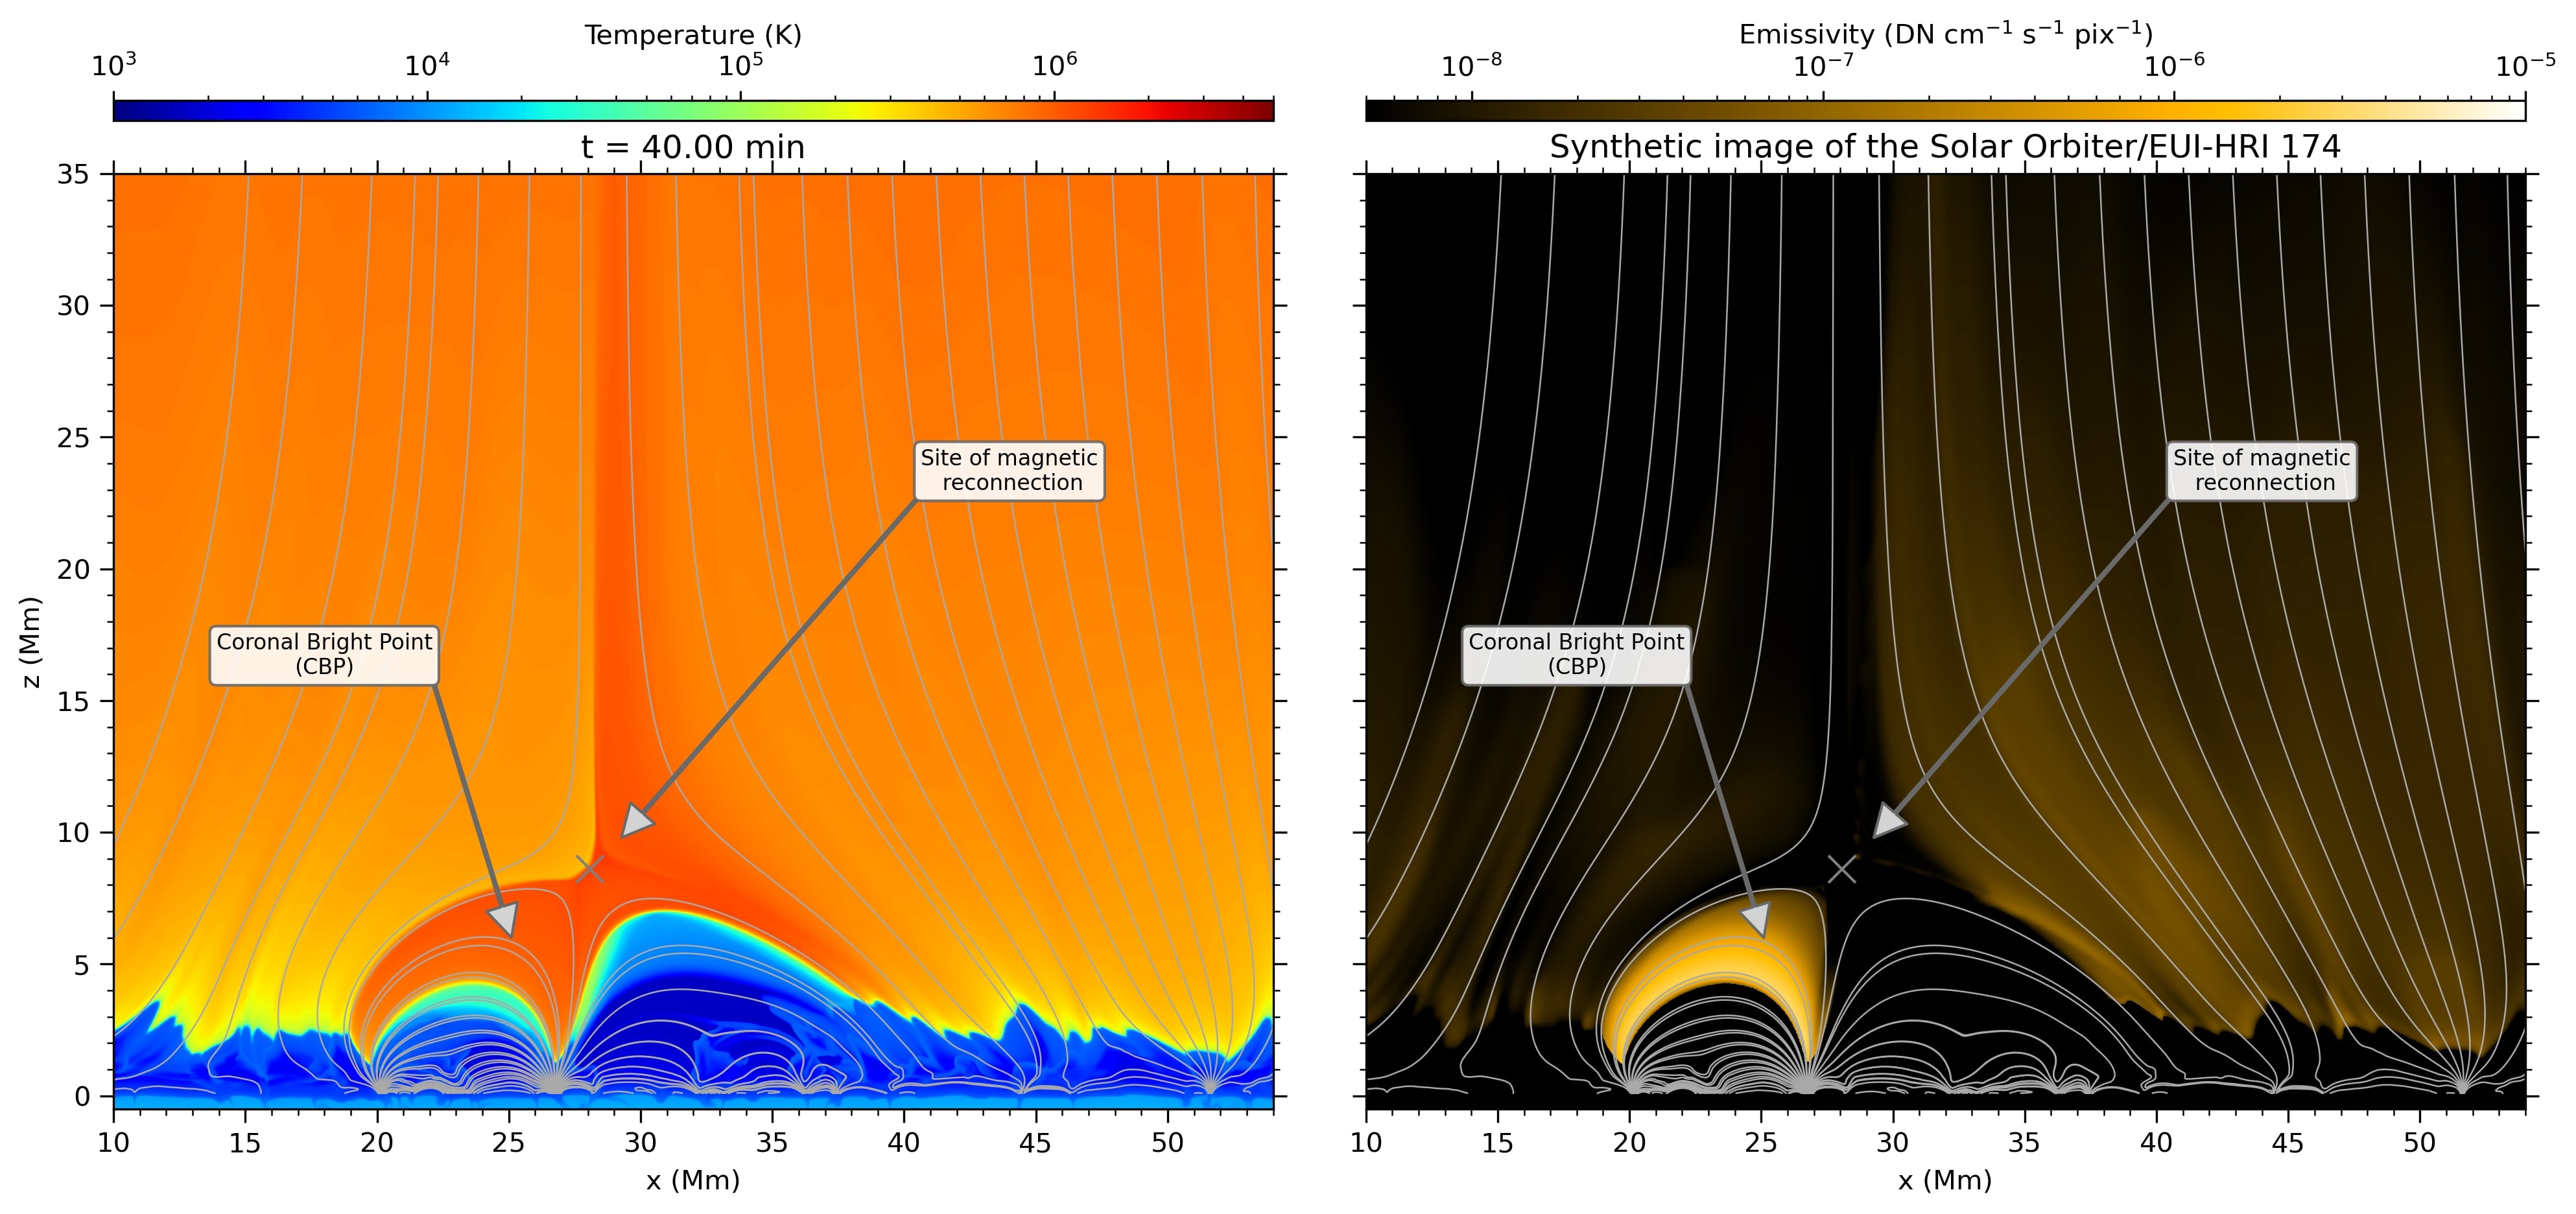 Results of the recent 2D model of CBPs by Nóbrega-Siverio and Moreno-Insertis (2022). Left: temperature. Right: Image showing how the simulation would look like if observed with the Solar Orbiter mission in the extreme ultraviolet from space. The CBP is distinguished by the hot magnetic loops that appear bright in the right panel.